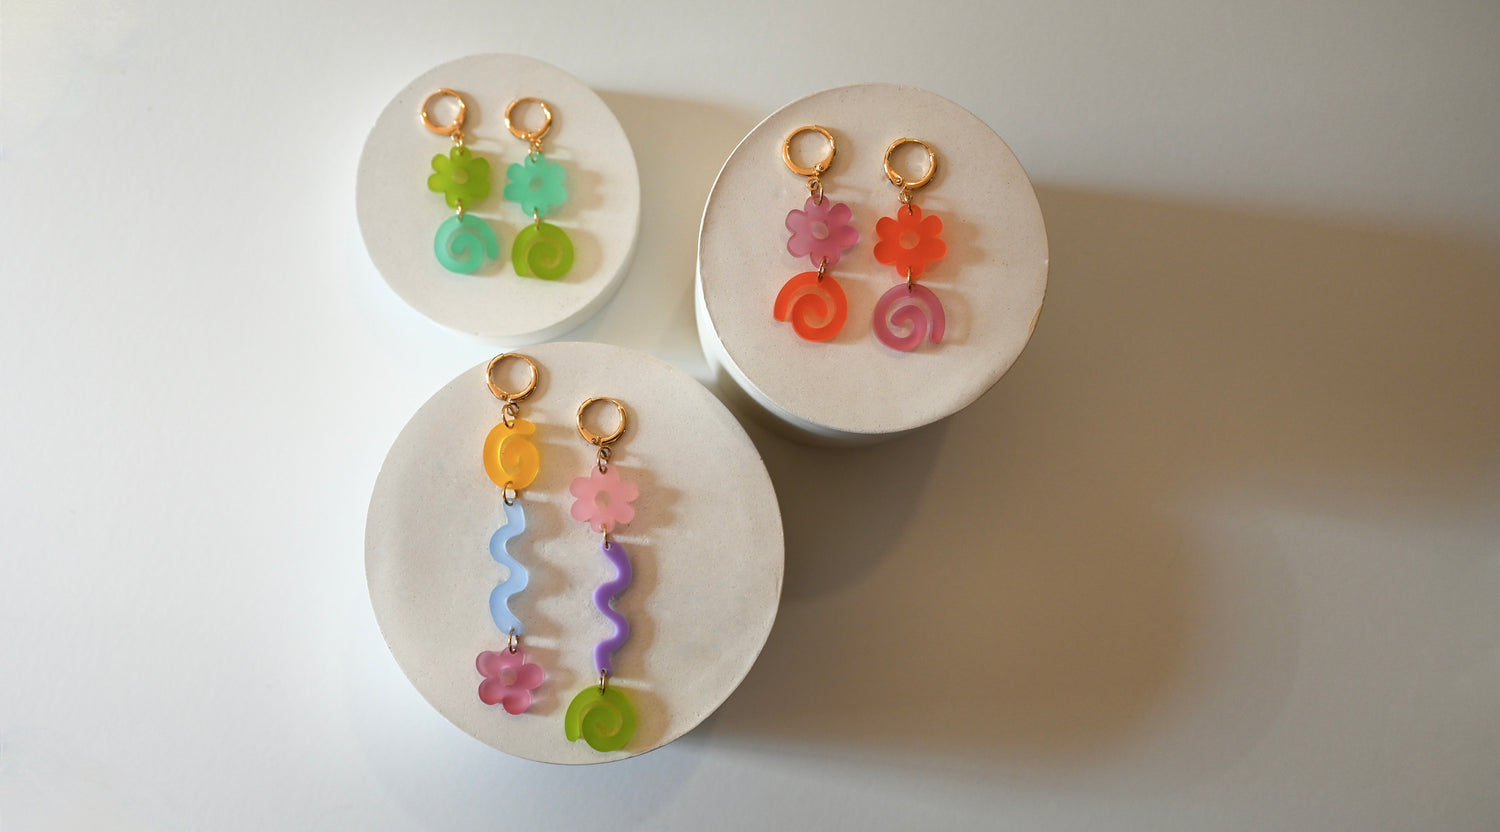 3 pairs of colorful maximalist earrings by jewelry brand Shape and Color